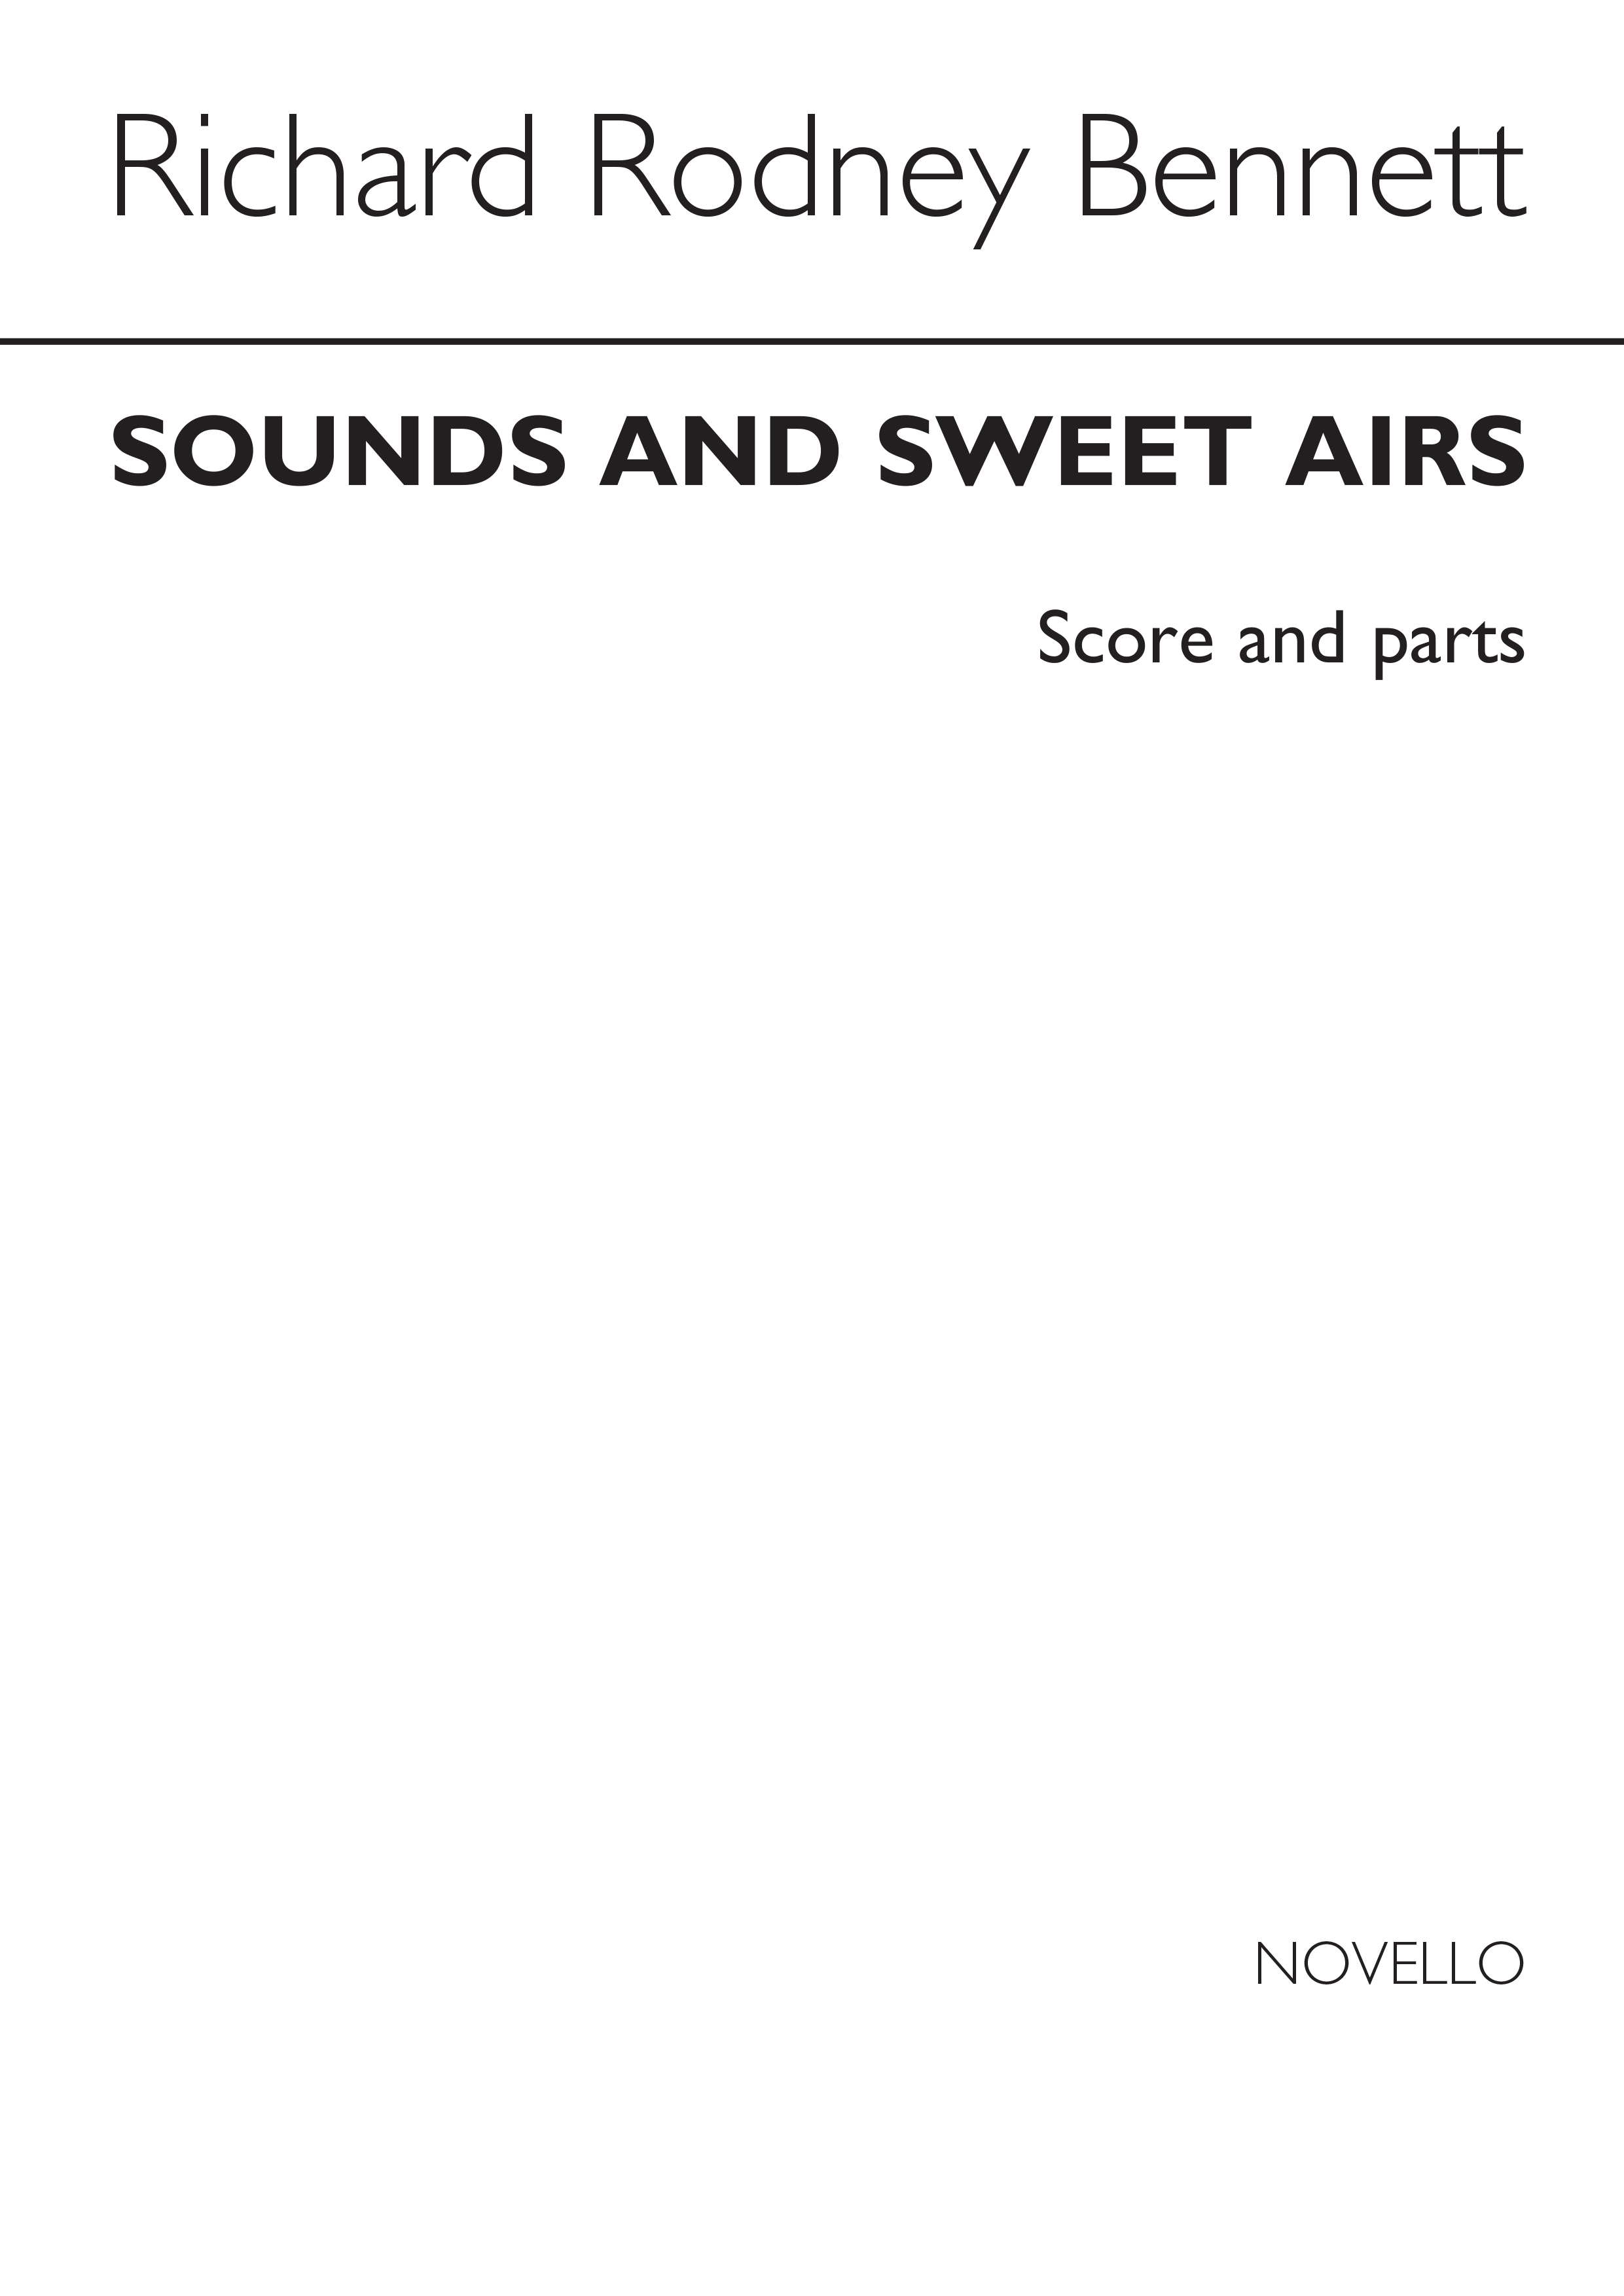 Richard Rodney Bennett: Sounds And Sweet Aires